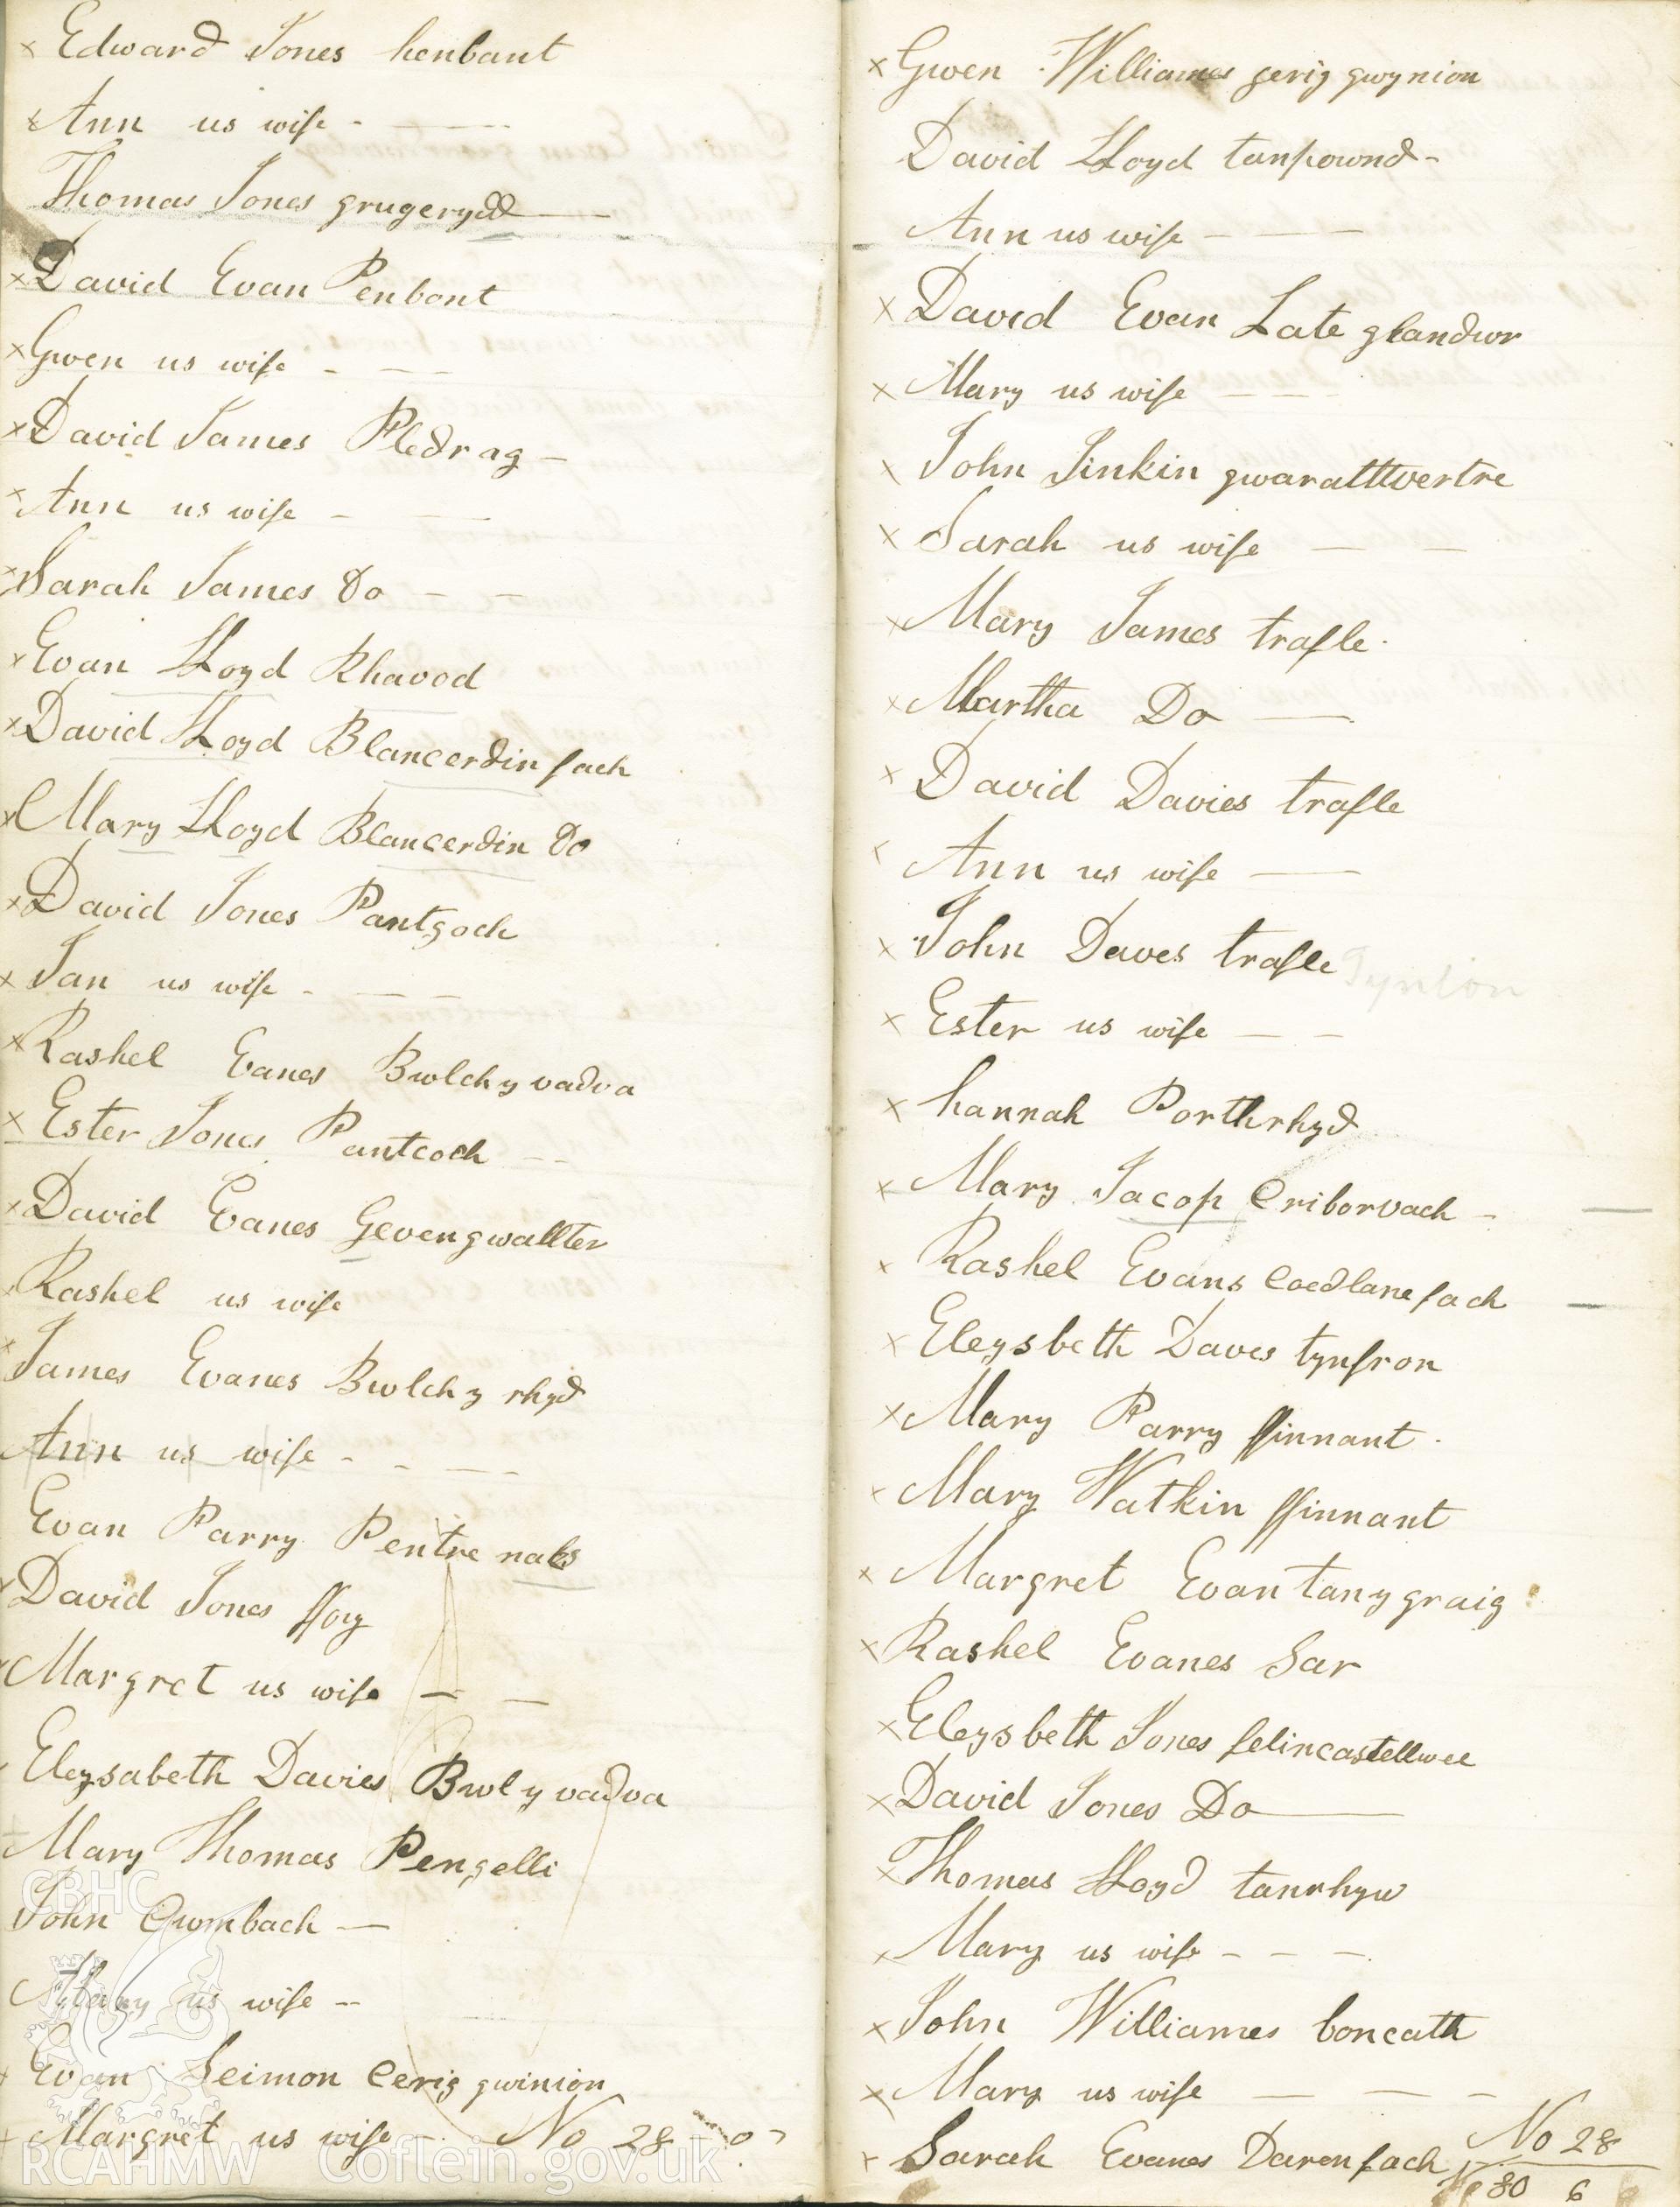 Page from handwritten Subscriber's book for yr Hen Gapel, Rhydowen. Names on this double page begin with Edward Jones henbont and end with Sarah Evans Darenfach No 28 - 80 6. Donated to the RCAHMW as part of the Digital Dissent Project.